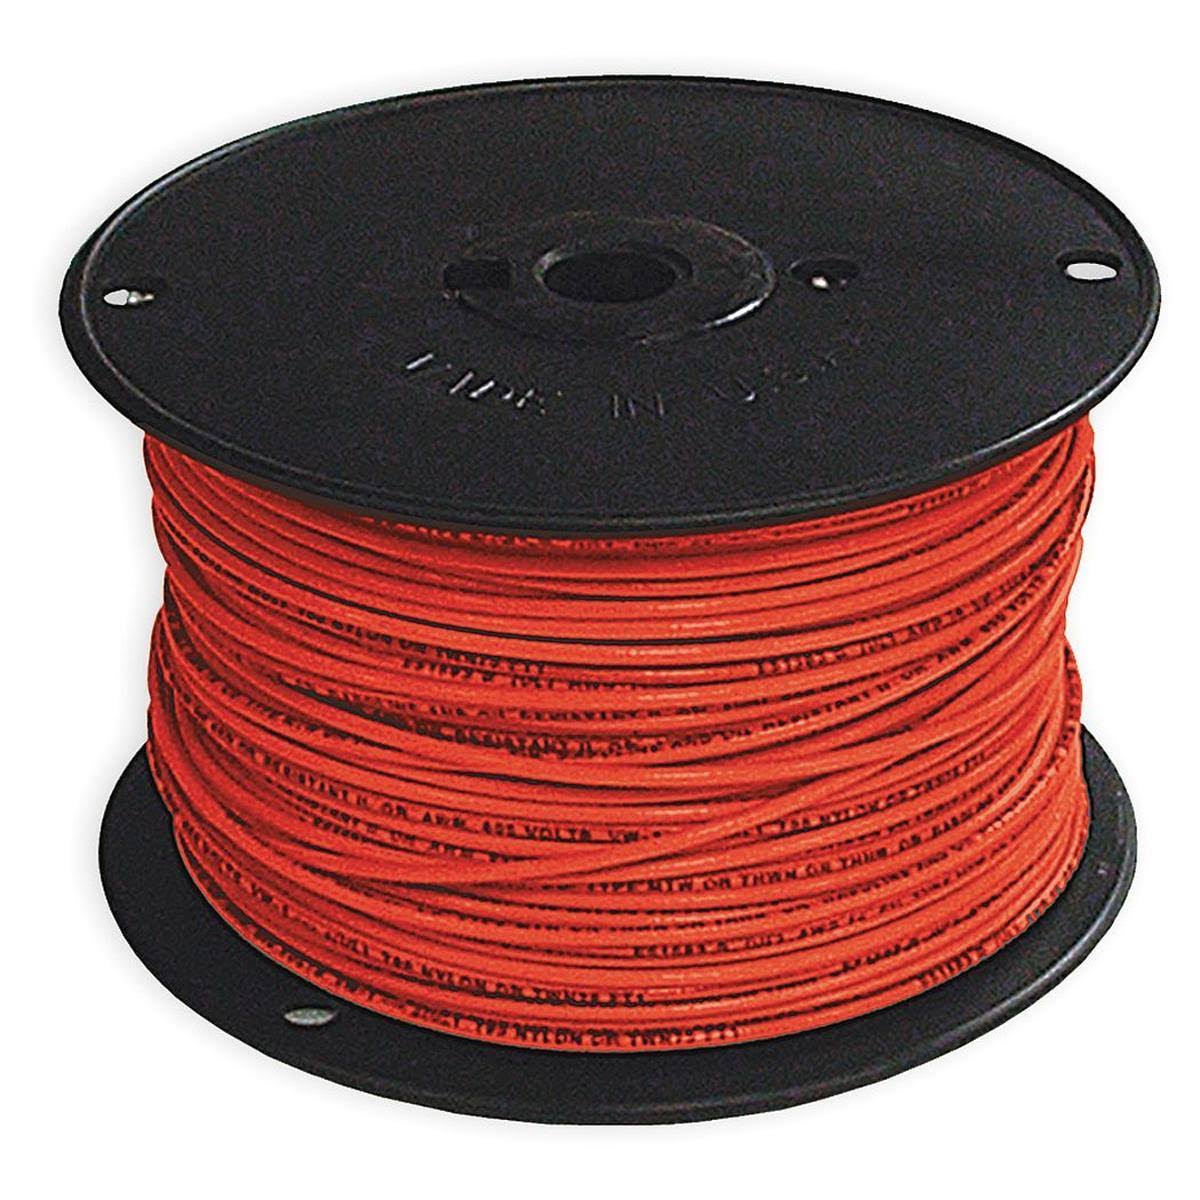 Southwire Company Building Wire - 14STR THHN, 500', Red